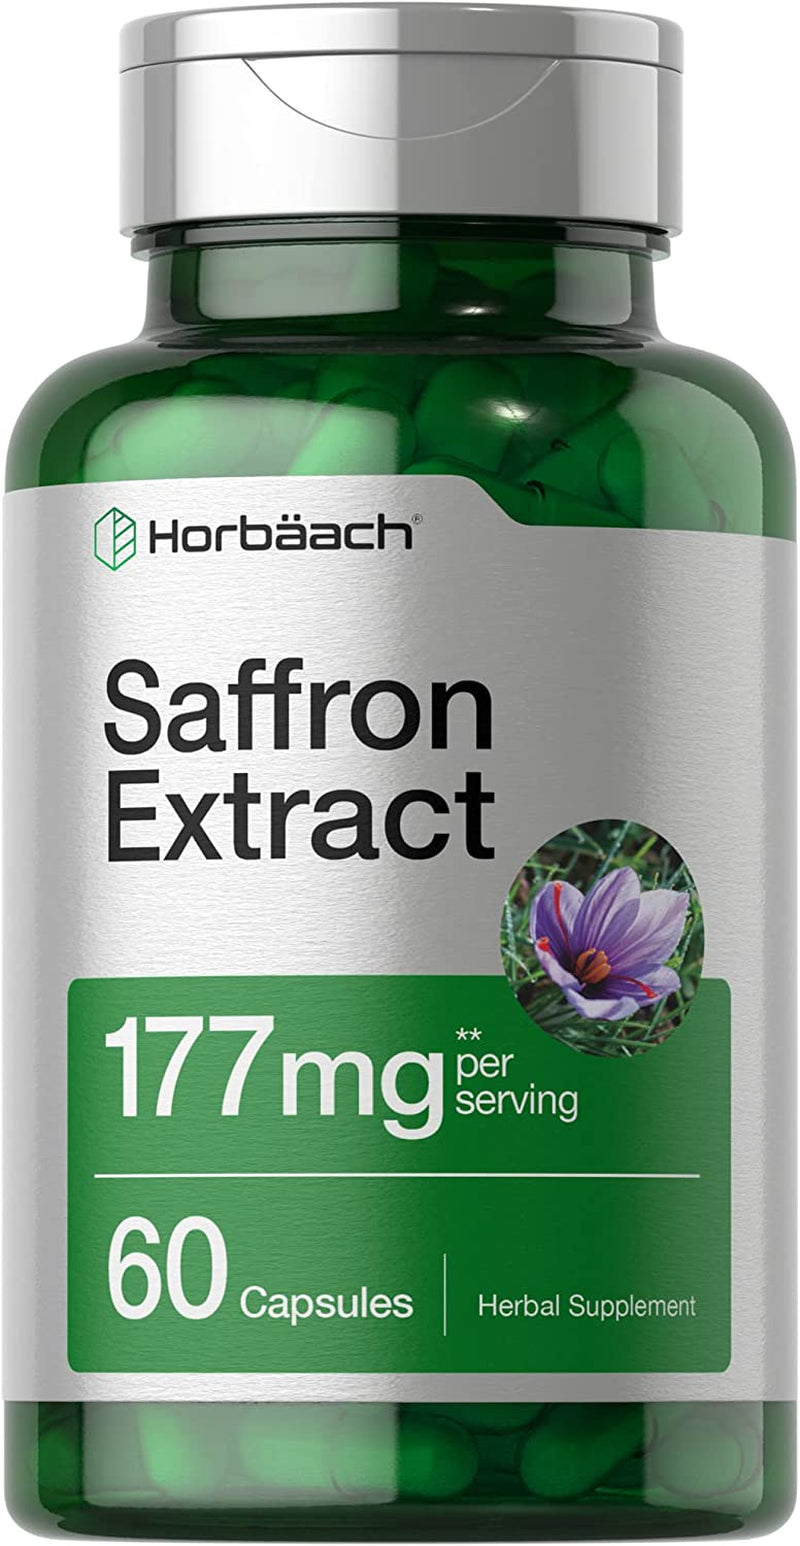 Saffron Extract Capsules 177 Mg 60 Count | Non-Gmo, Gluten Free Supplement | by Horbaach